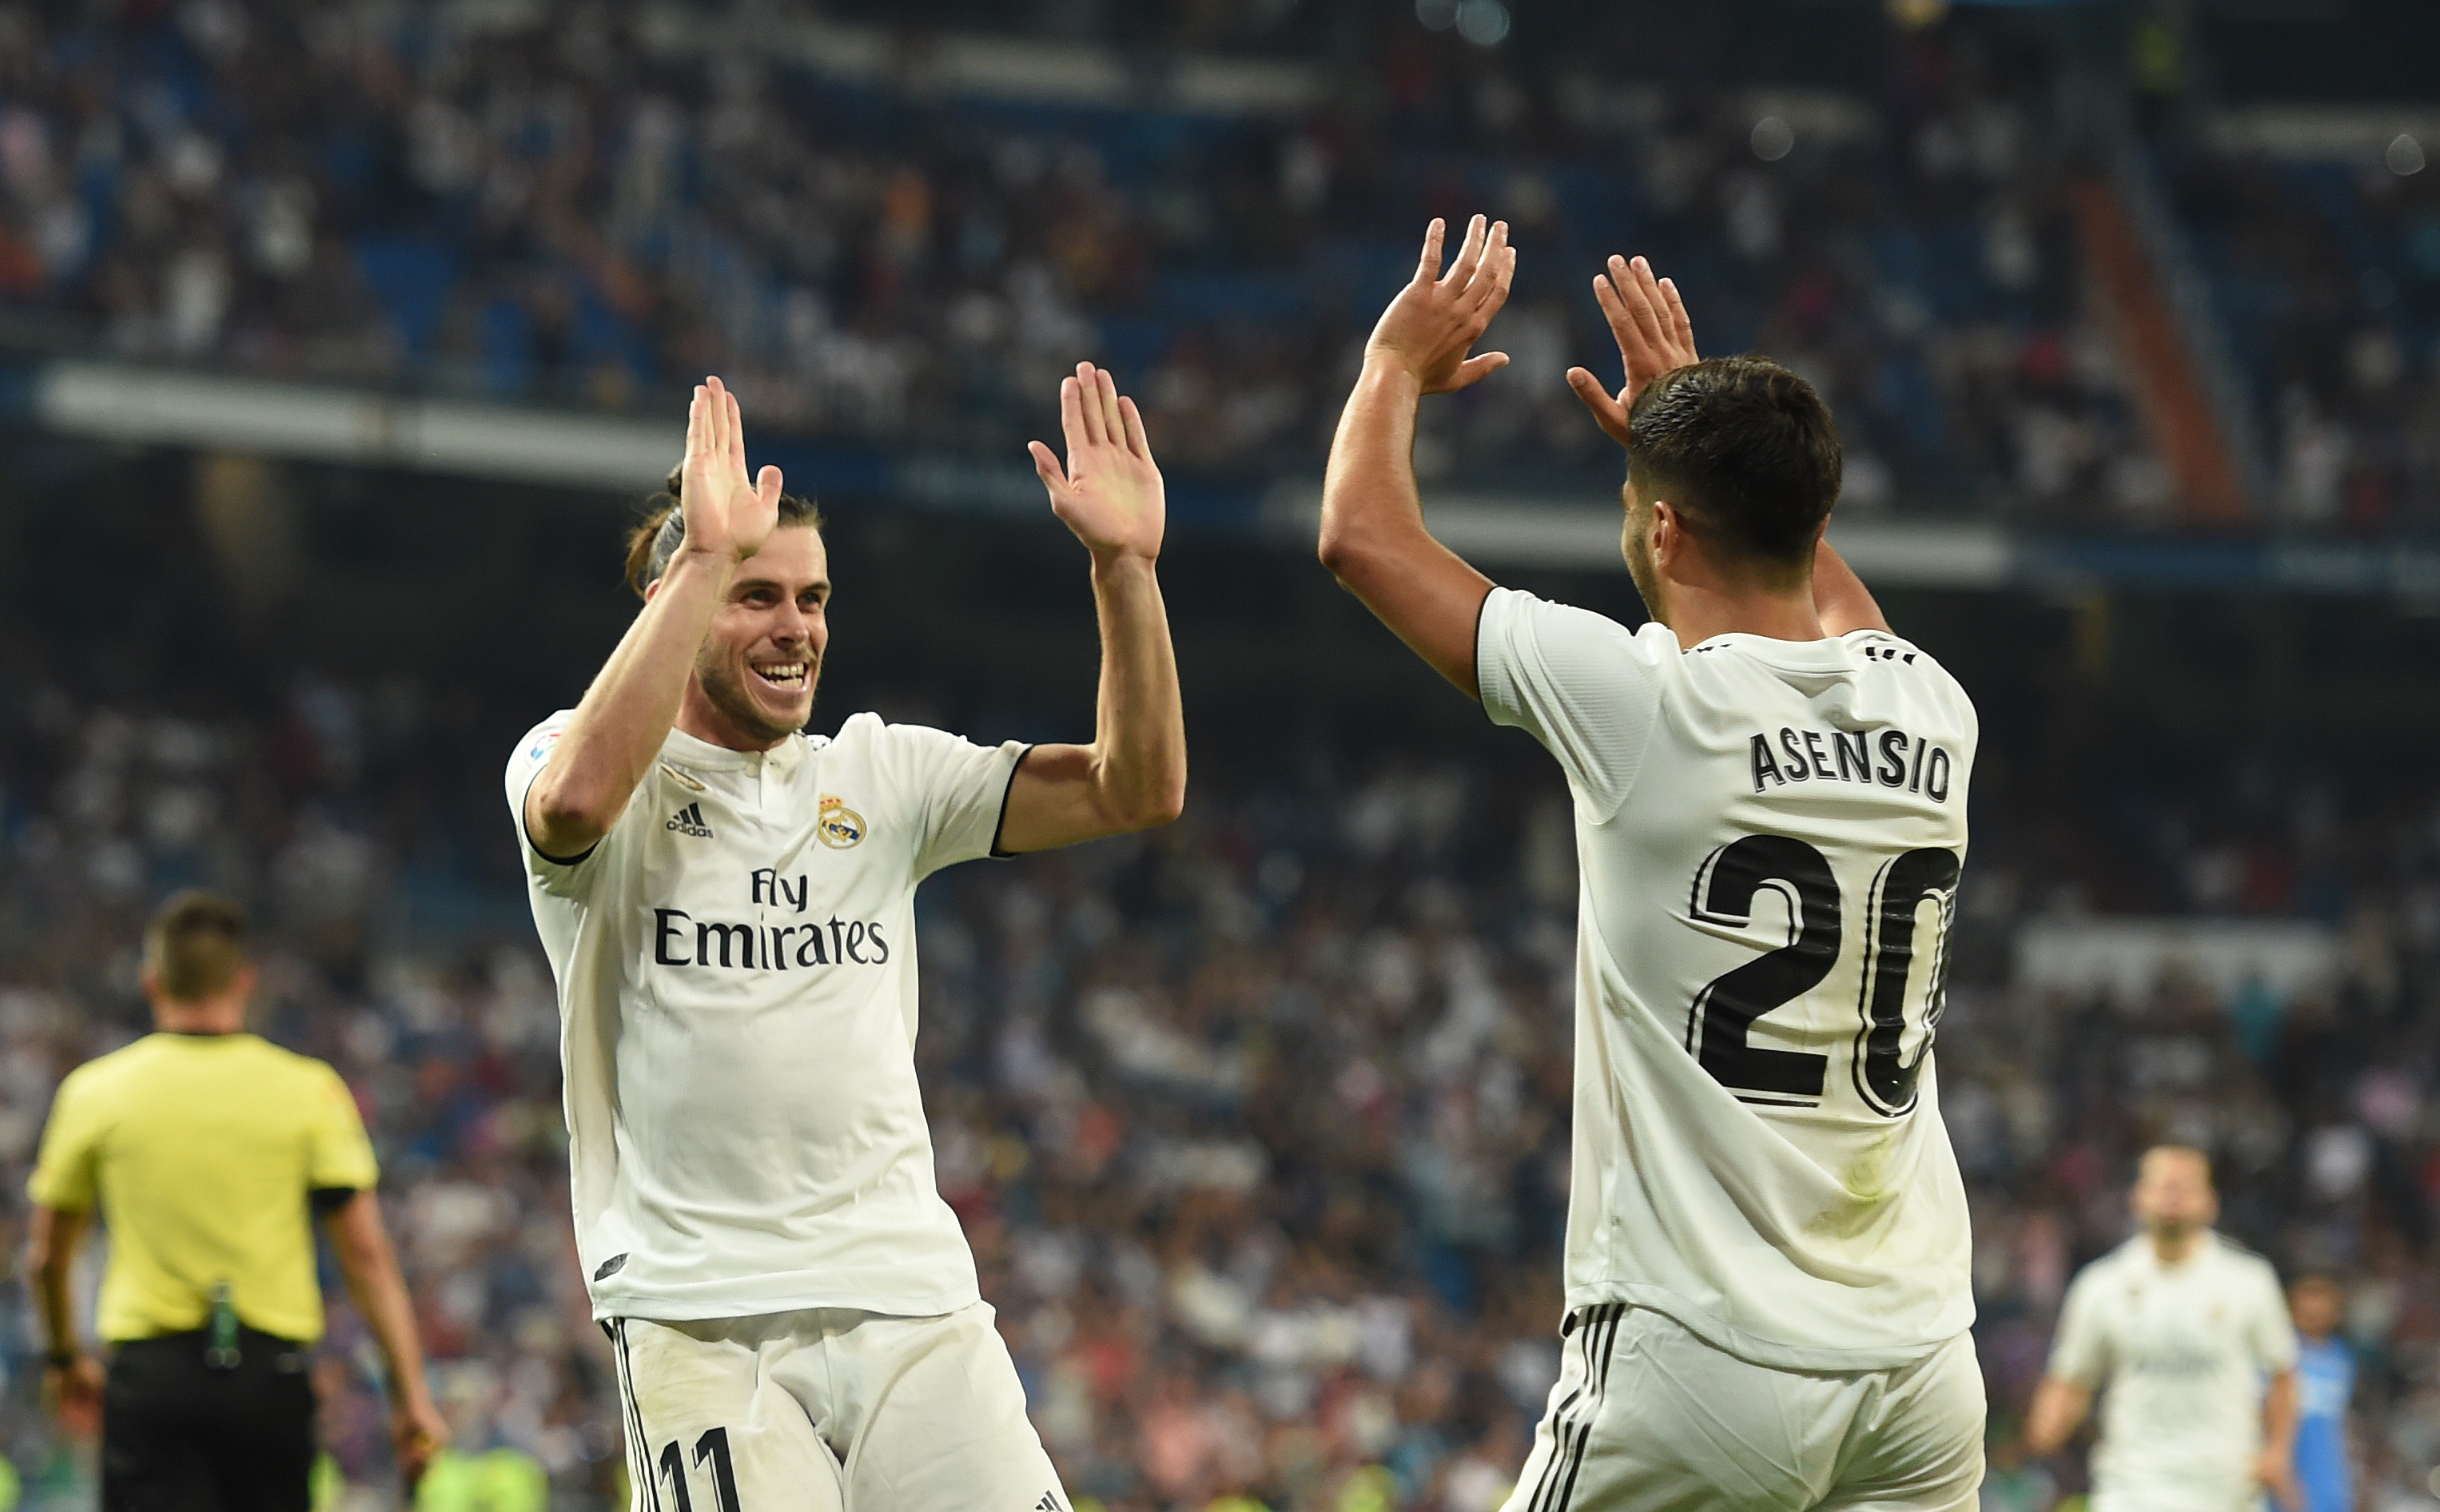 MADRID, SPAIN - AUGUST 19: Gareth Bale of Real Madrid celebrates with Marco Asensio after scoring his teams second goal during the La Liga match between Real Madrid CF and Getafe CF at Estadio Santiago Bernabeu on August 19, 2018 in Madrid, Spain. (Photo by Denis Doyle/Getty Images)